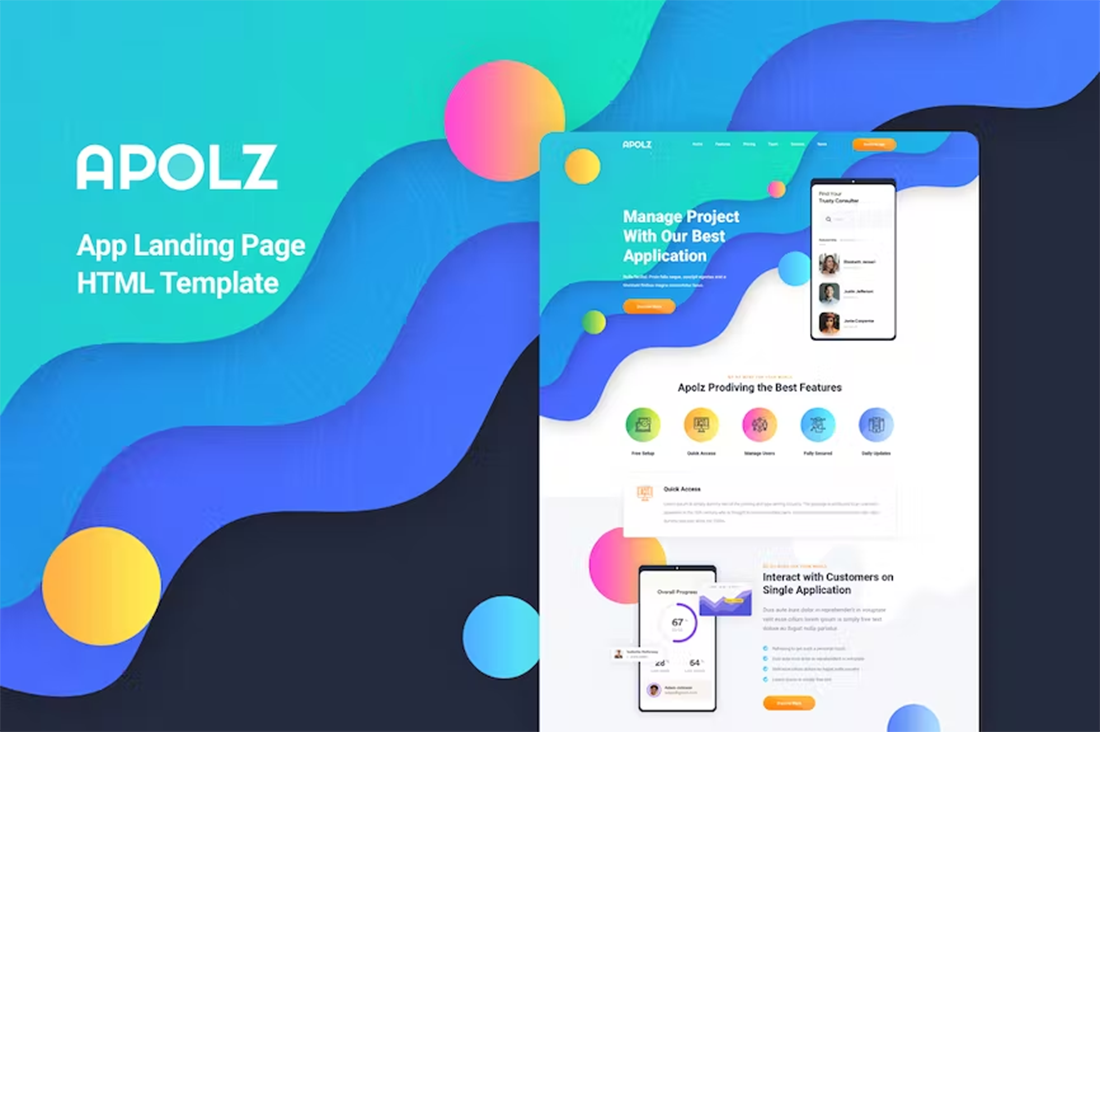 Free Apolz - App Landing Page HTML Template cover image.